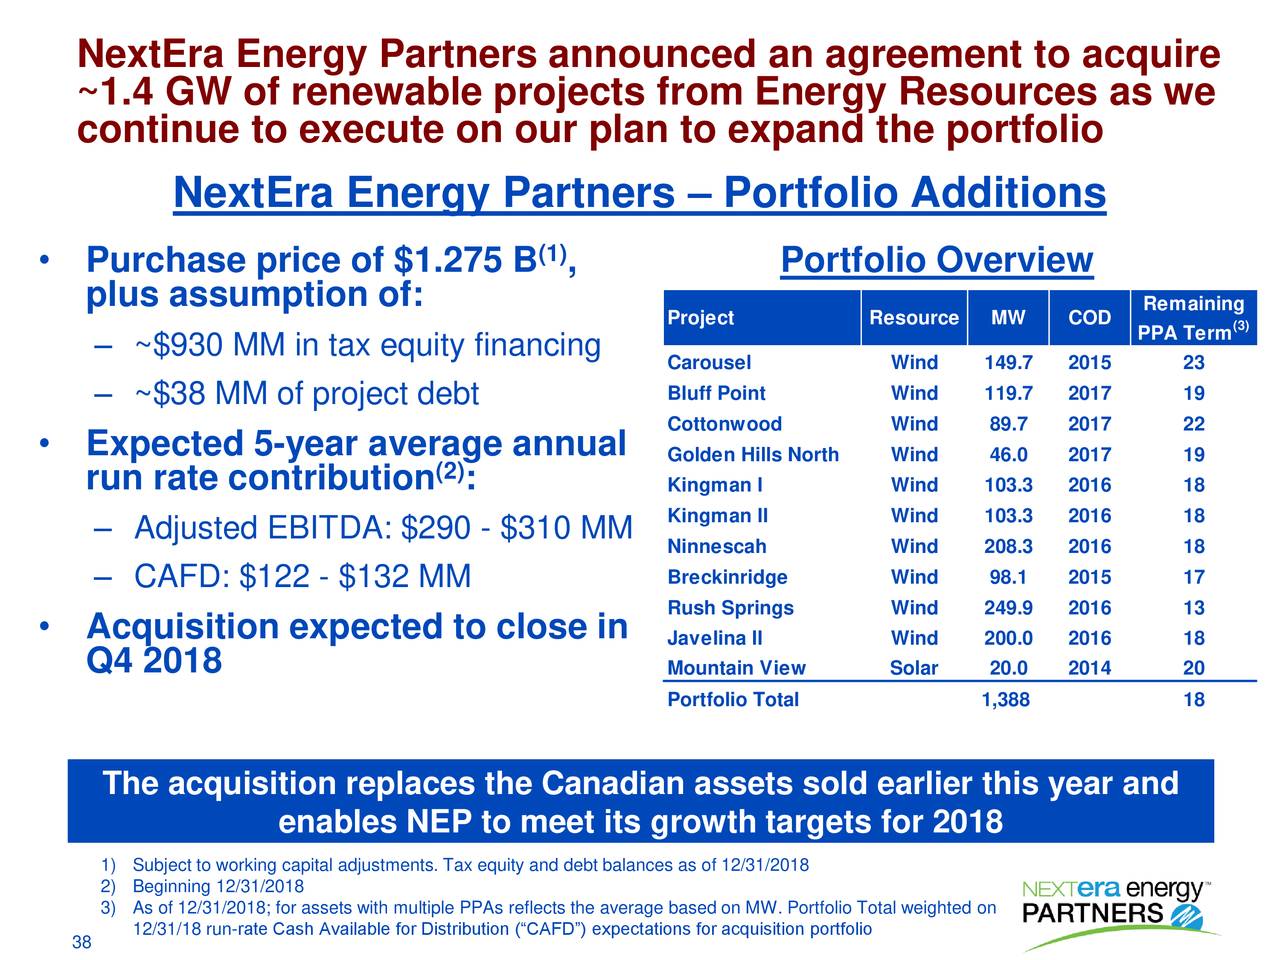 NextEra Energy Partners announced an agreement to acquire